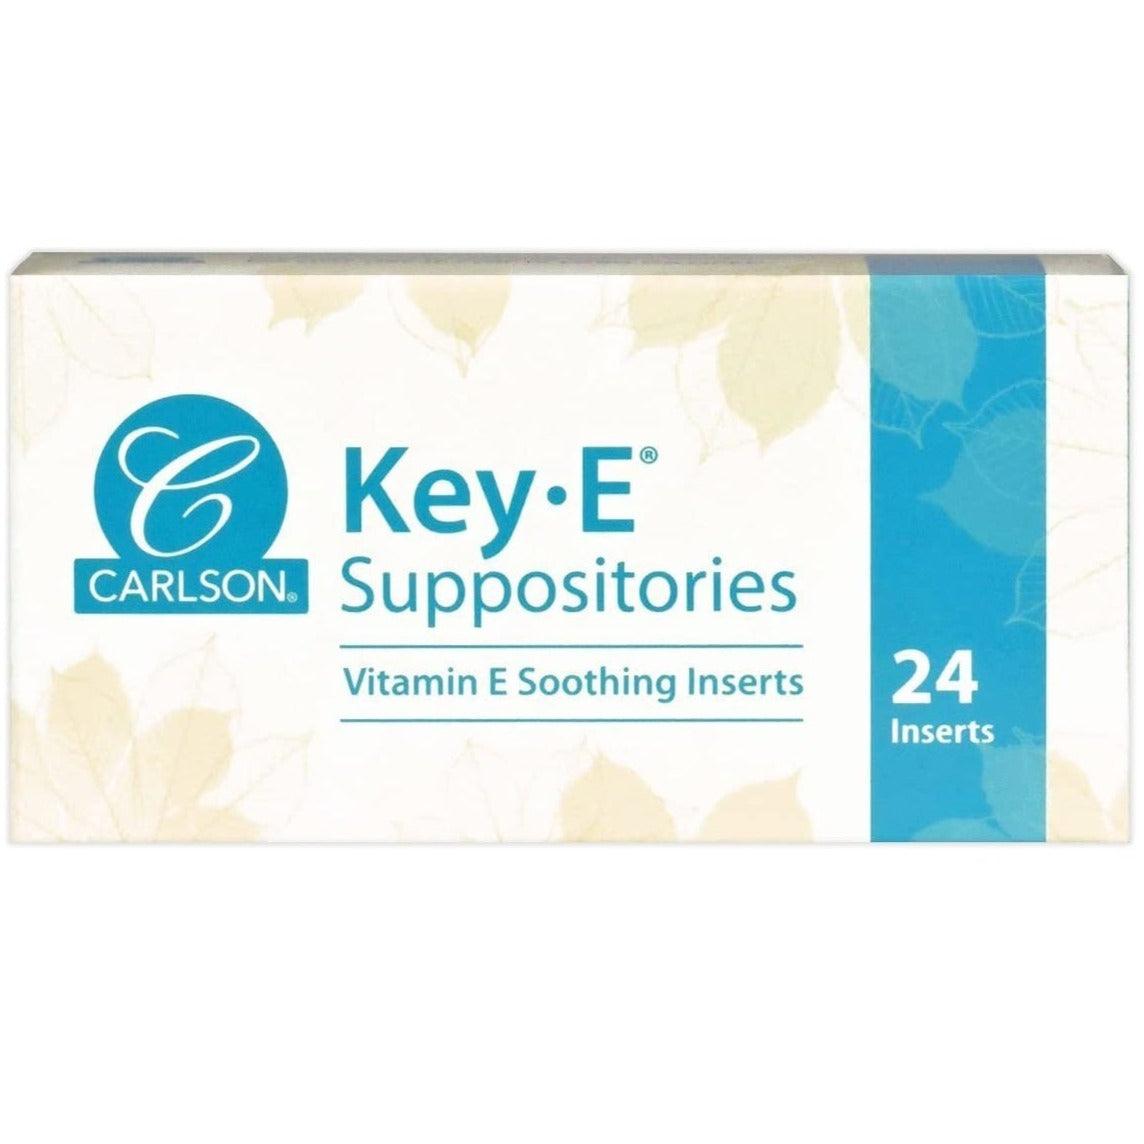 Carlson Key E Suppositories-24 Inserts Supplements at Village Vitamin Store